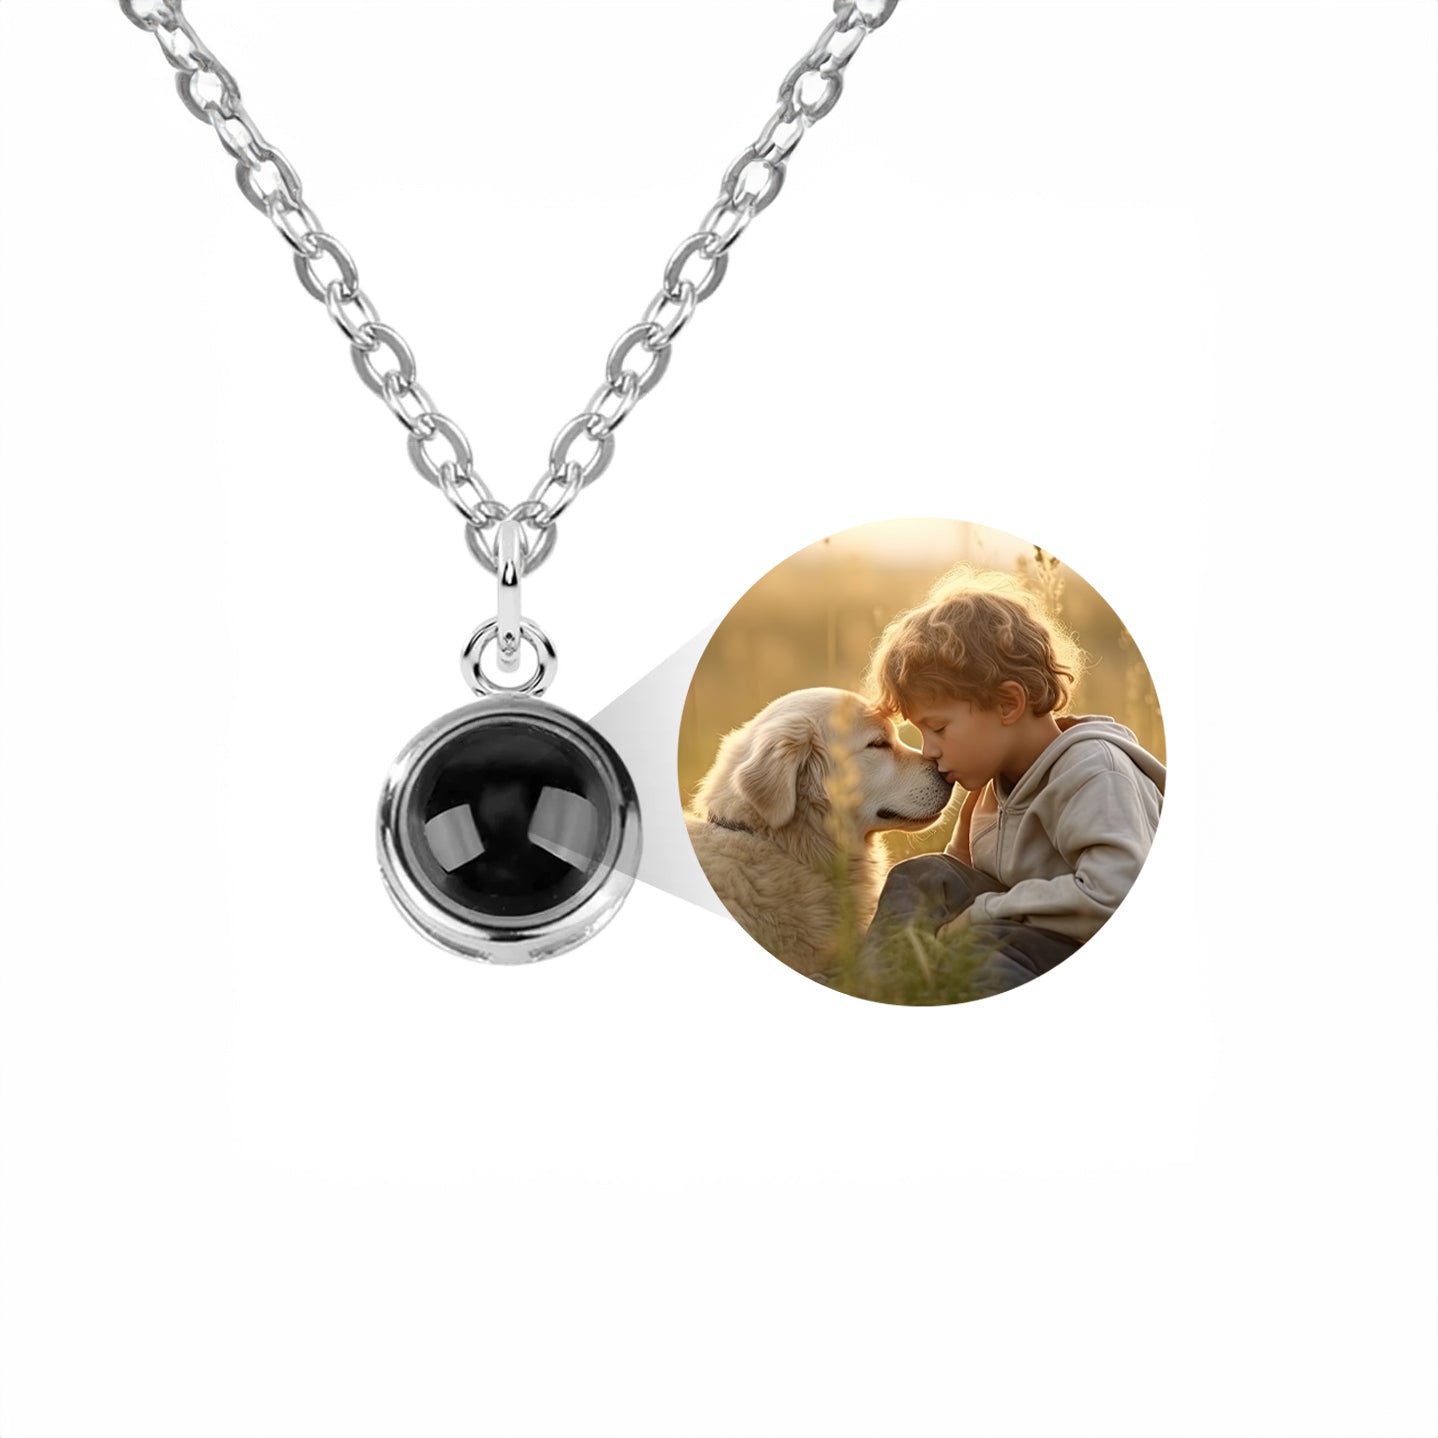 PERSONALIZED CUSTOM PROJECTION NECKLACE – Luxuriant Time